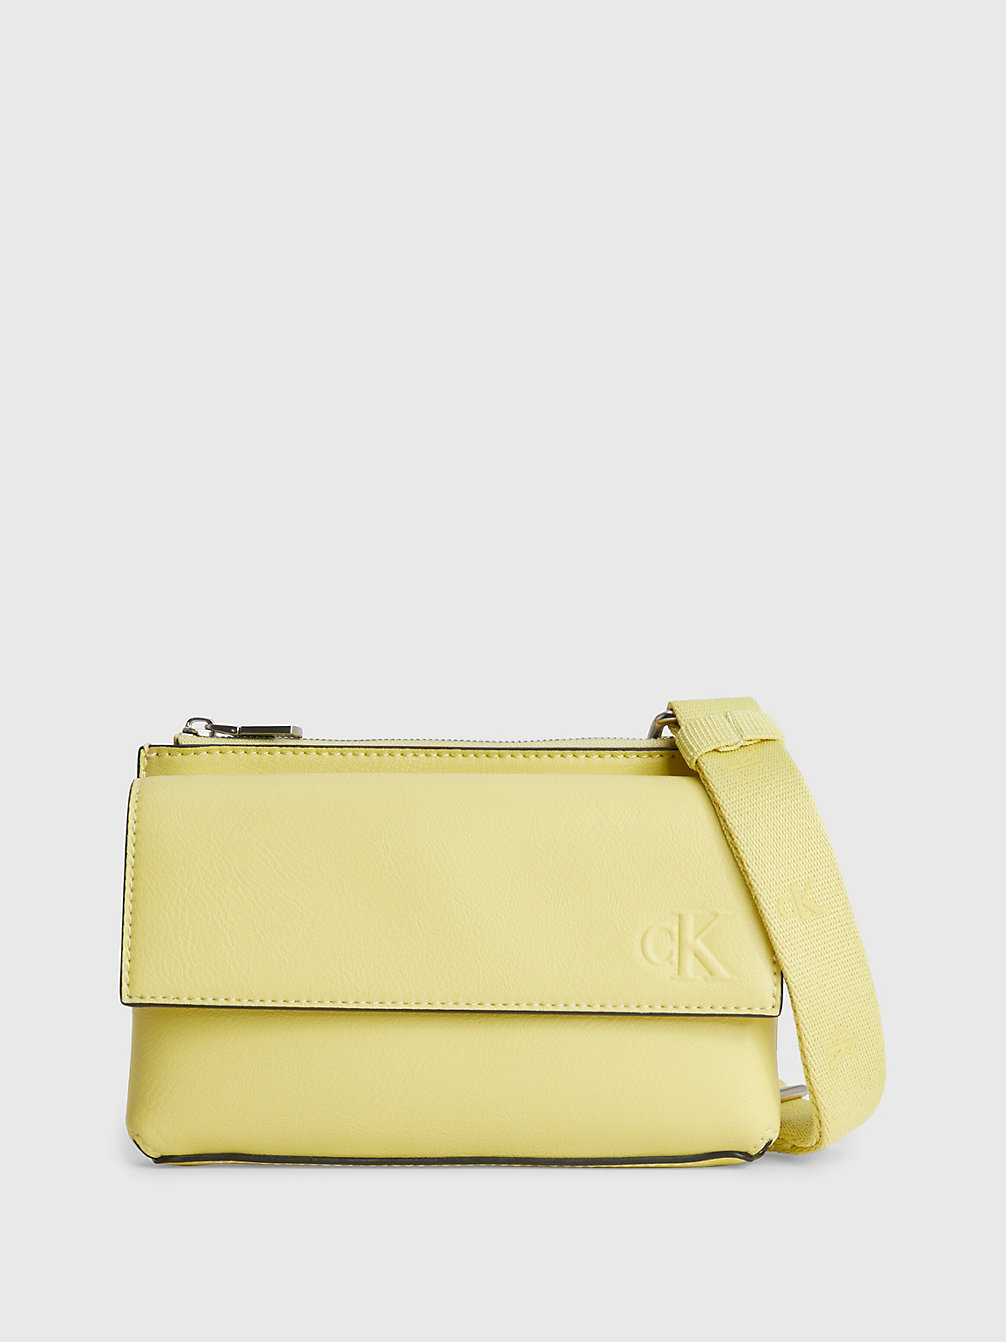 YELLOW SAND Recycled Crossbody Phone Bag undefined women Calvin Klein